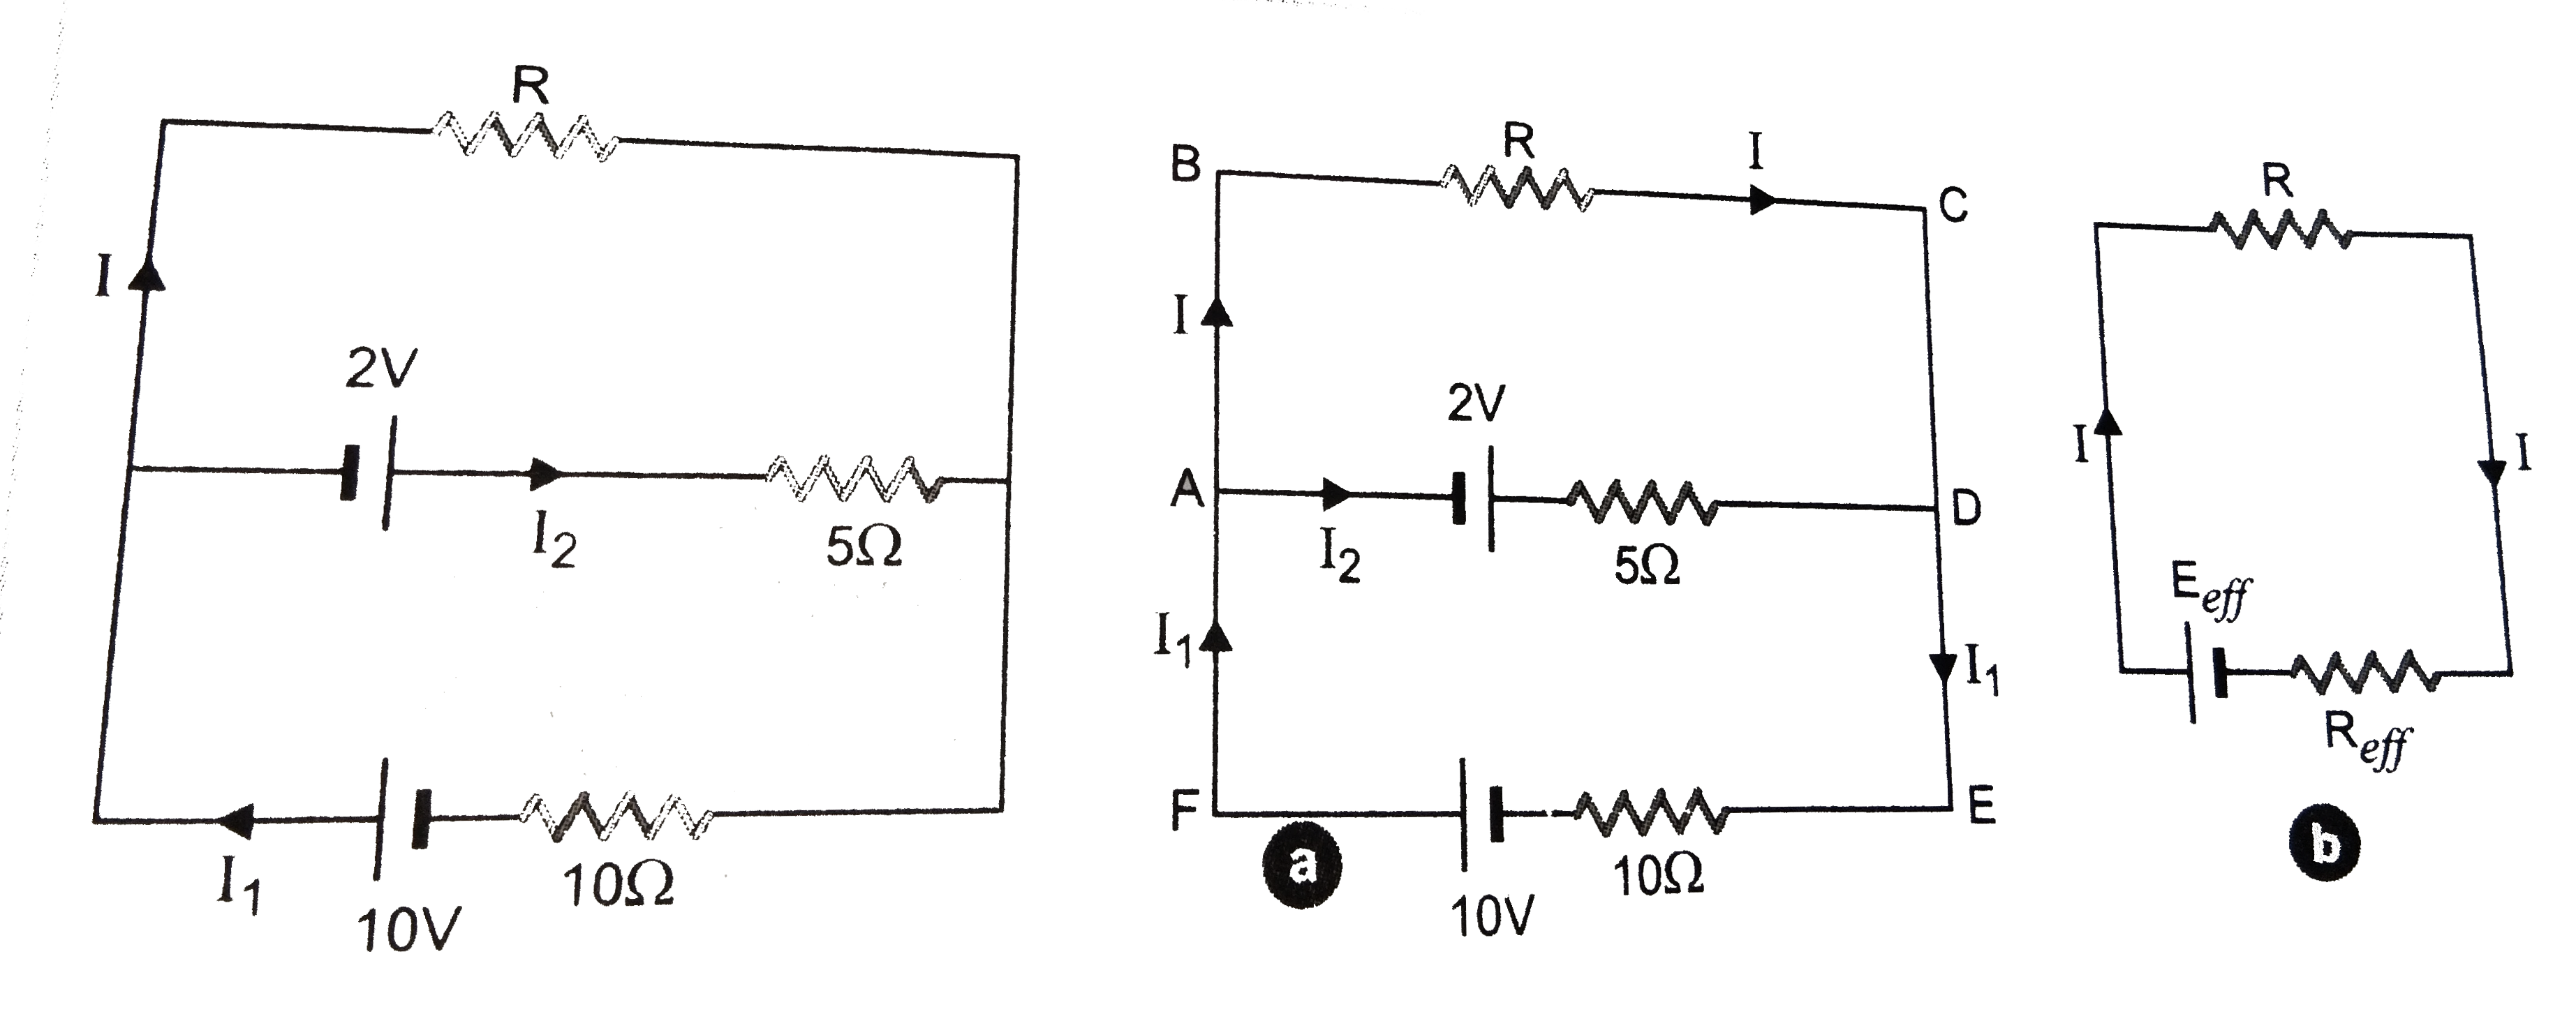 Two cells of voltage 10Vand 2 V and internal resistance 10 Omega and 5Omega respectively , are connected in parallel with the pesition and of 10V battery connected to negative pole of 2V battery Find the effected voltage and effected resistance of the combination